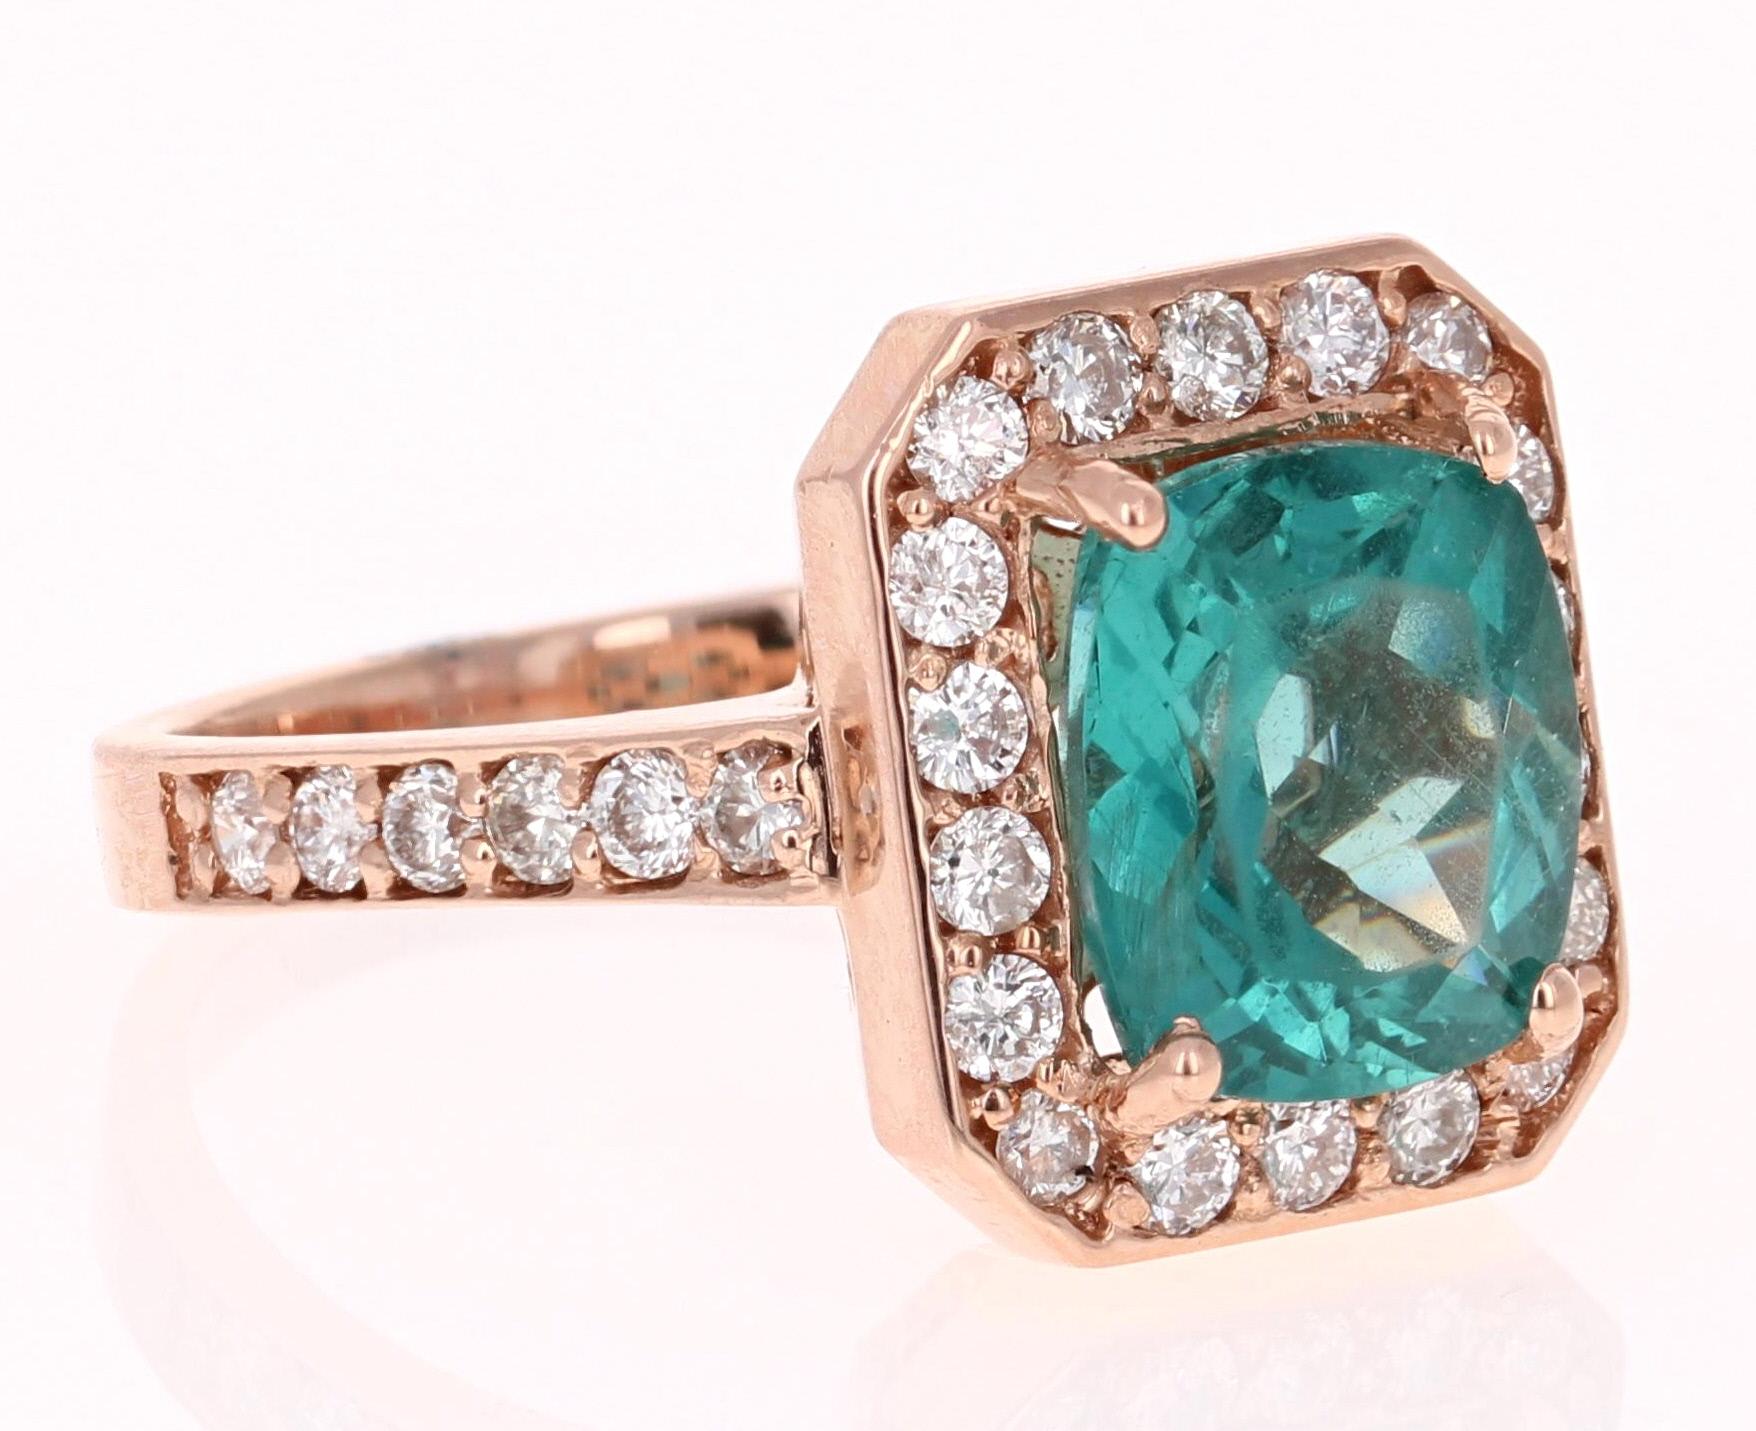 An Apatite Ring set beautifully in Rose Gold - such a beautiful and unique combination!!

This stunning Apatite and Diamond Ring can easily transform into a unique and classy engagement ring for your special someone!  The ring has a 3.01 Carat